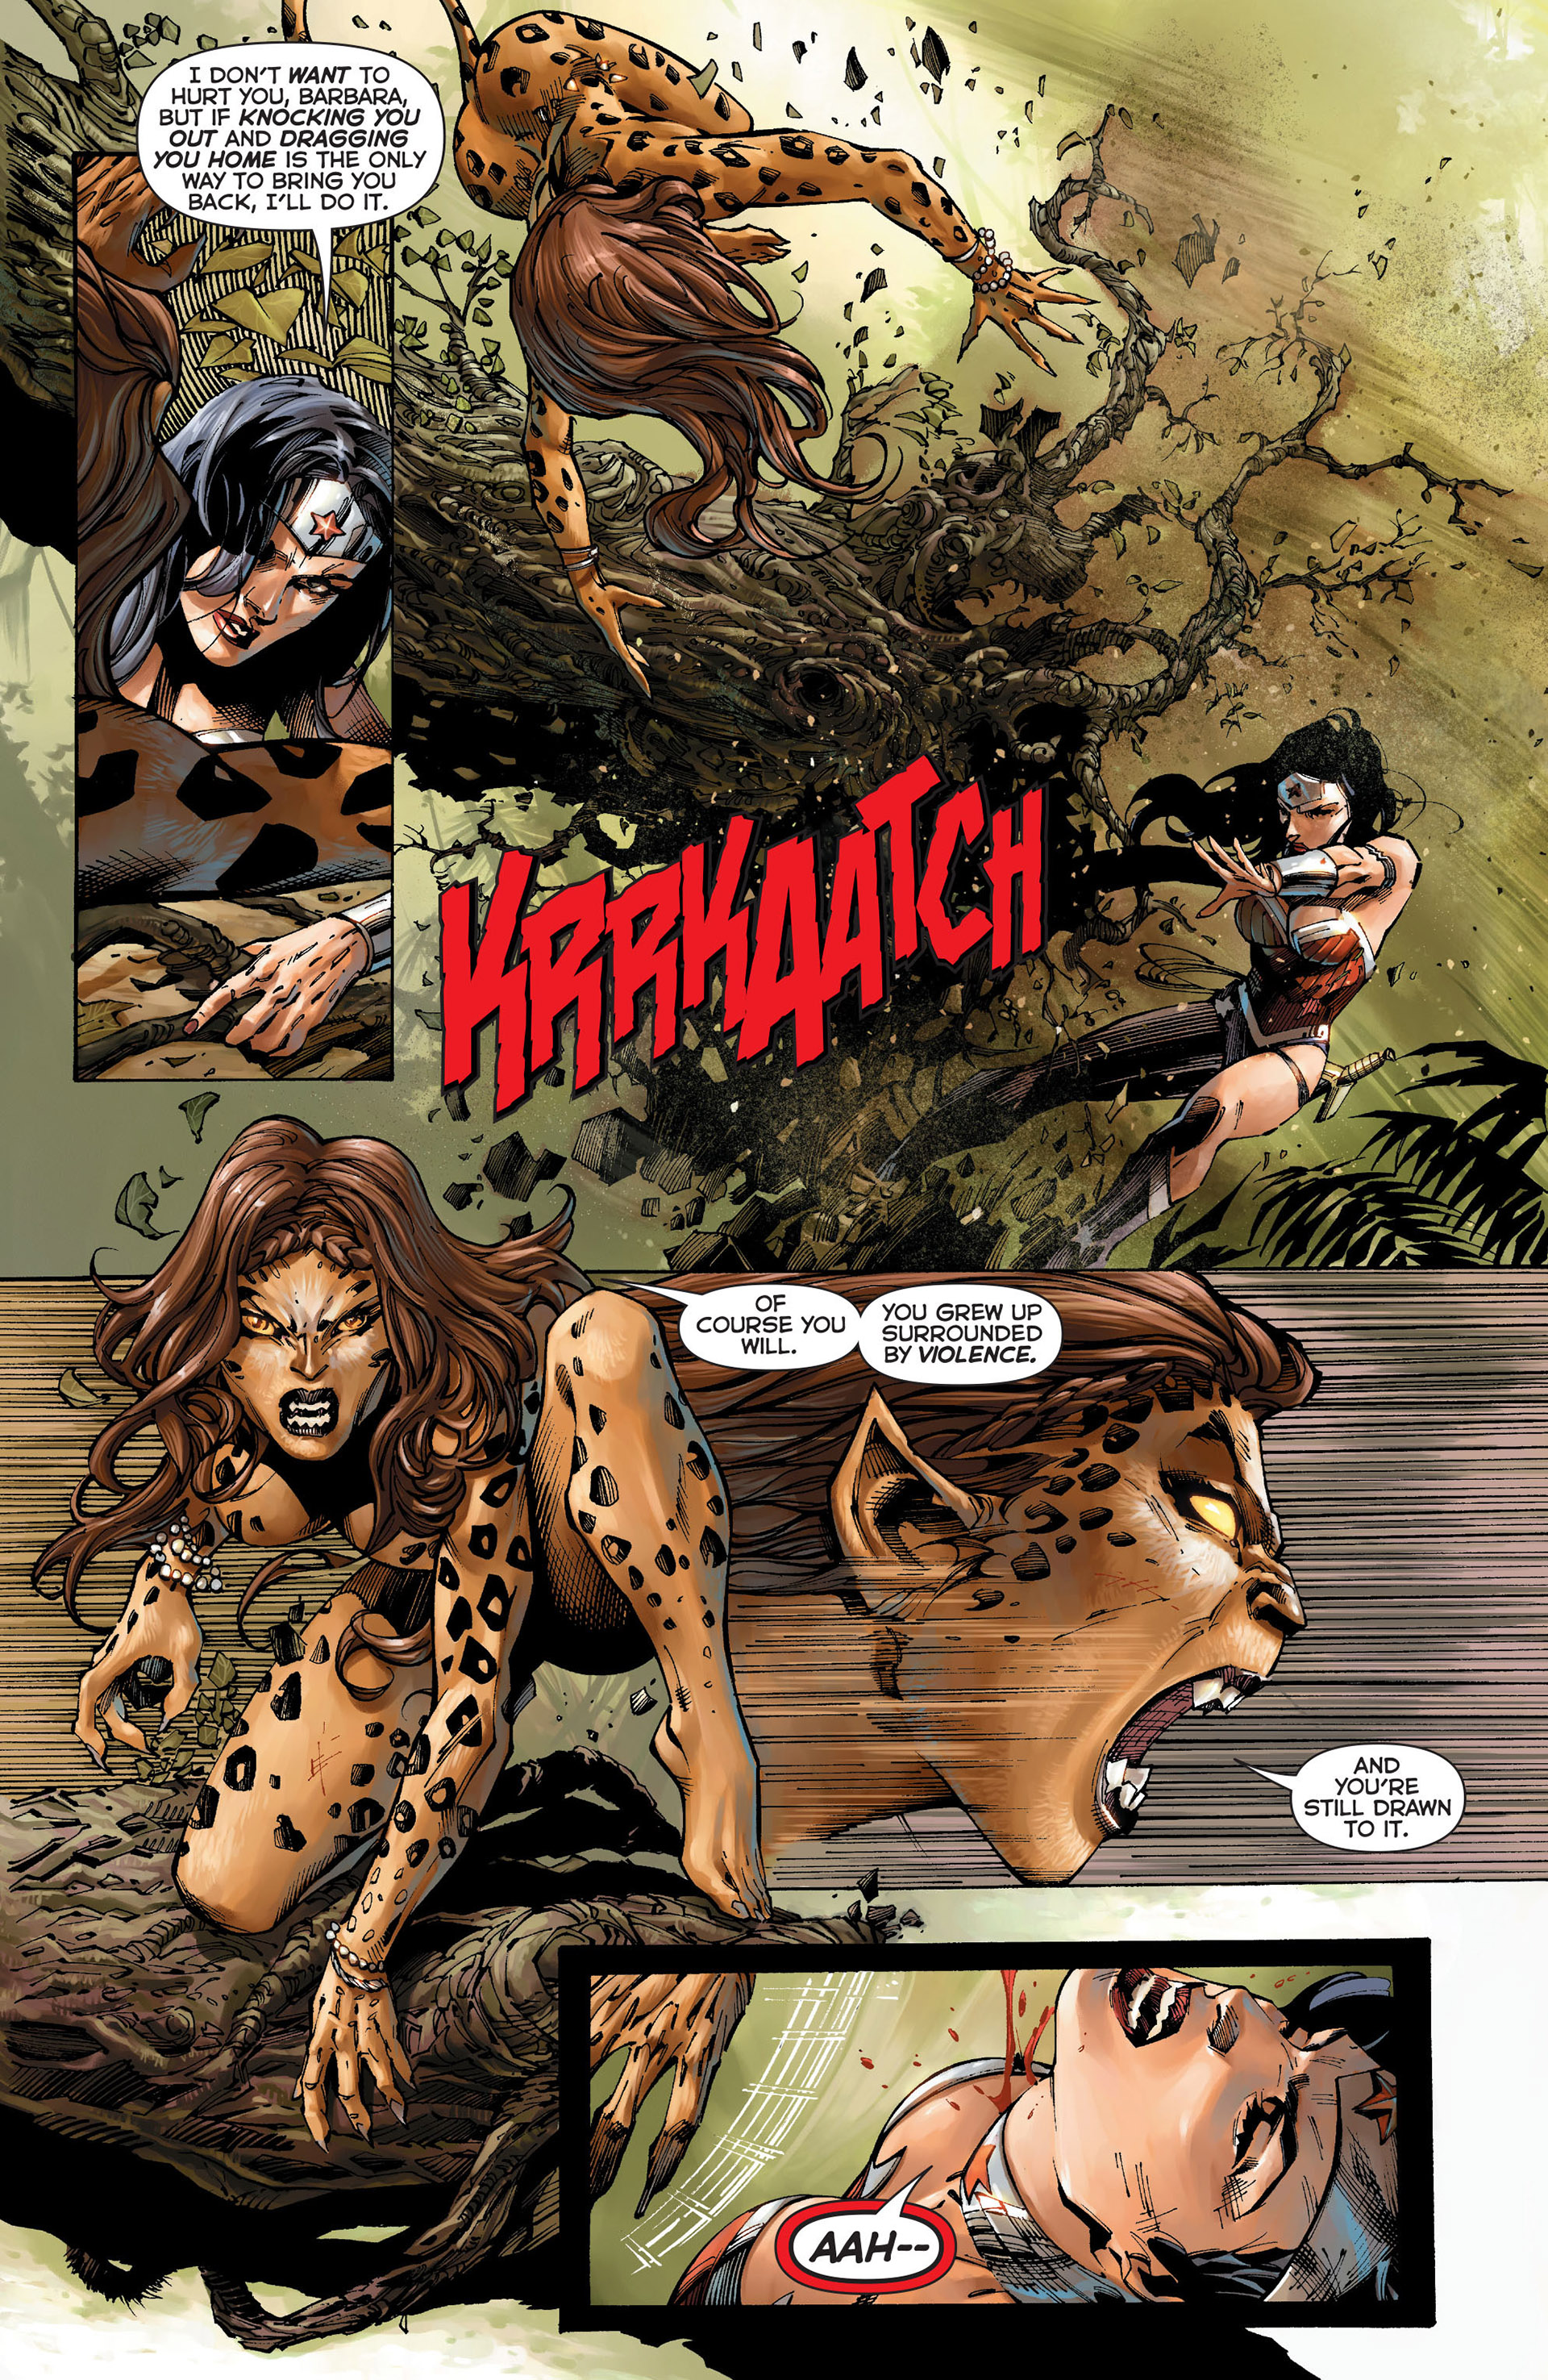 Batman Cheetah Porn - Justice League Issue 13 | Read Justice League Issue 13 comic online in high  quality. Read Full Comic online for free - Read comics online in high  quality .| READ COMIC ONLINE